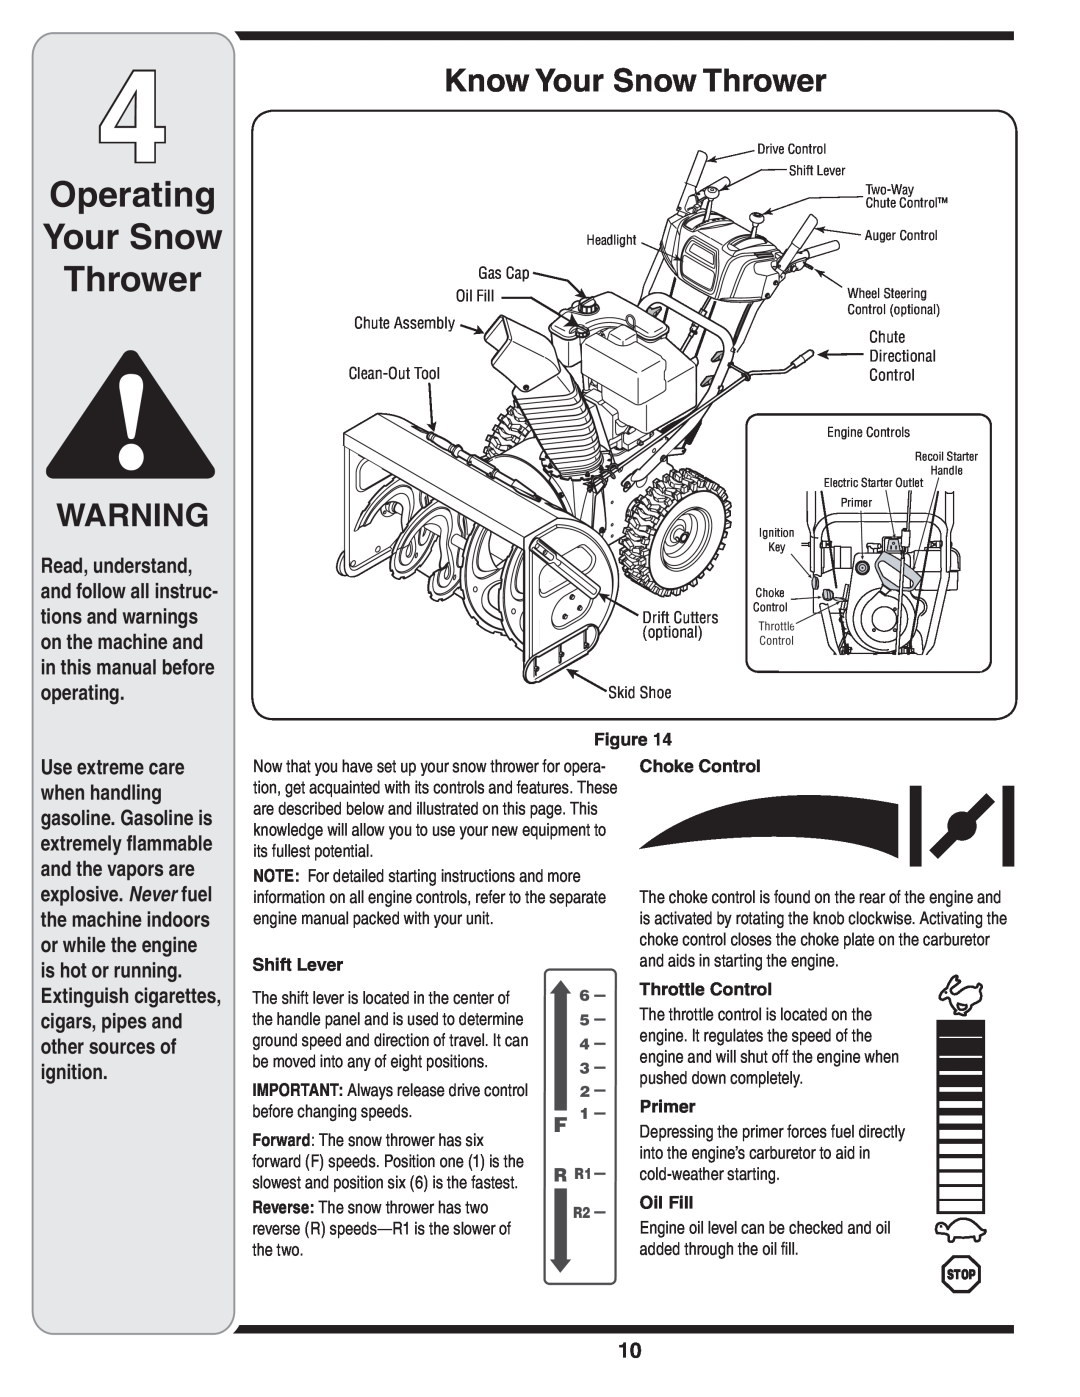 MTD 769-03247 Operating Your Snow Thrower, Know Your Snow Thrower, R R1, Shift Lever, be moved into any of eight positions 